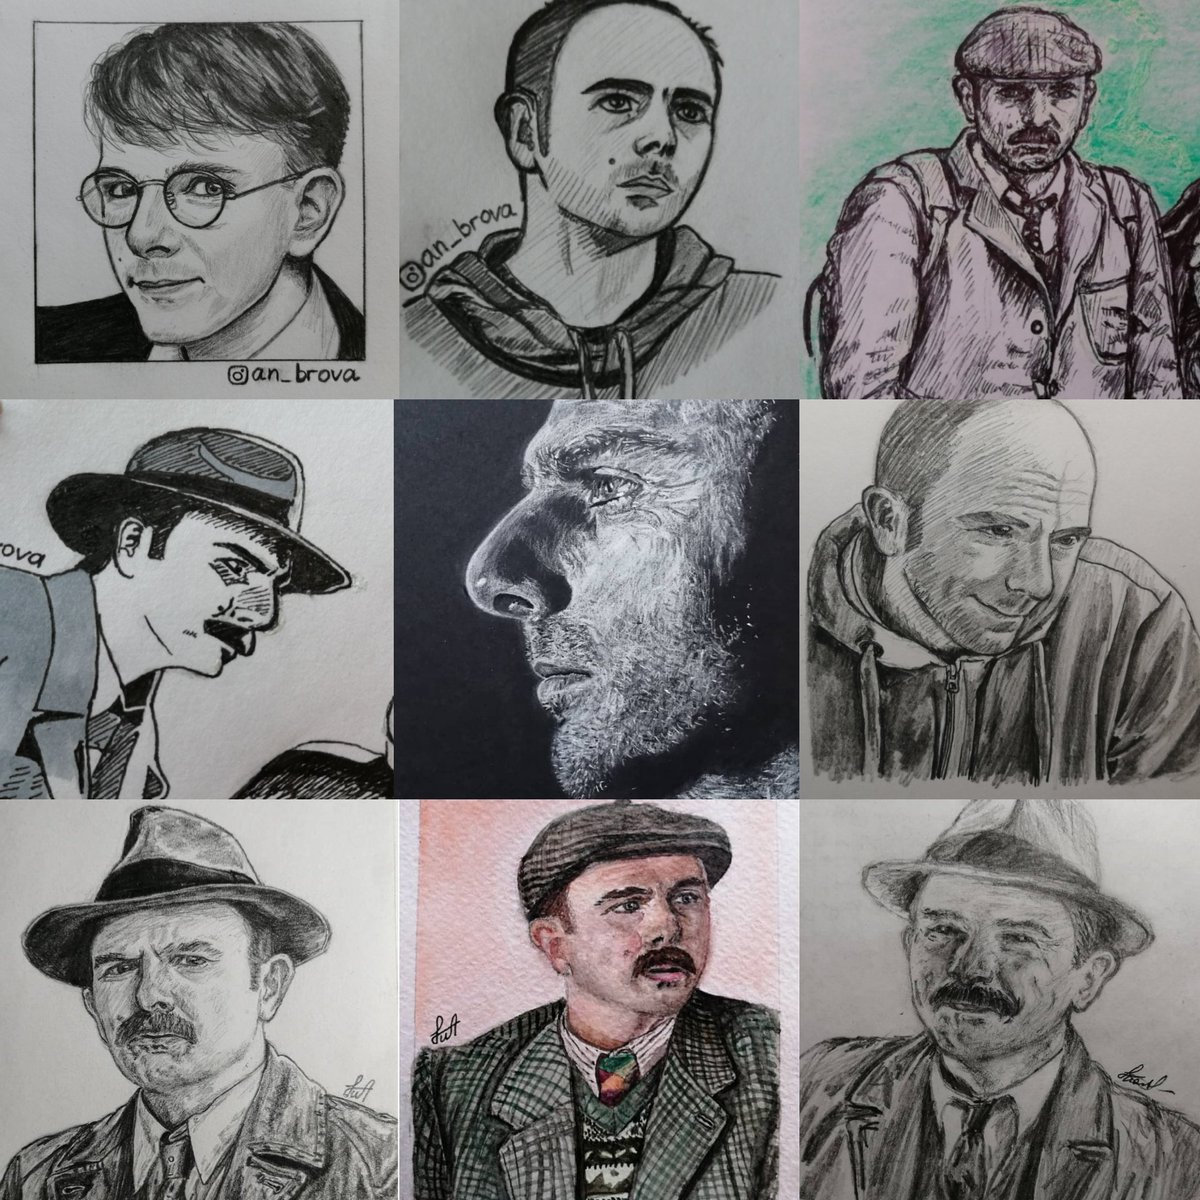 Happy Birthday to the wonderful @jackdeam The most talented, charismatic and favorite actor which I will always admire and which I will not get tired of drawing. I wish you good health and success in the acting game. Much love❤️
#jackdeam #fatherbrown #inspectormallory #art